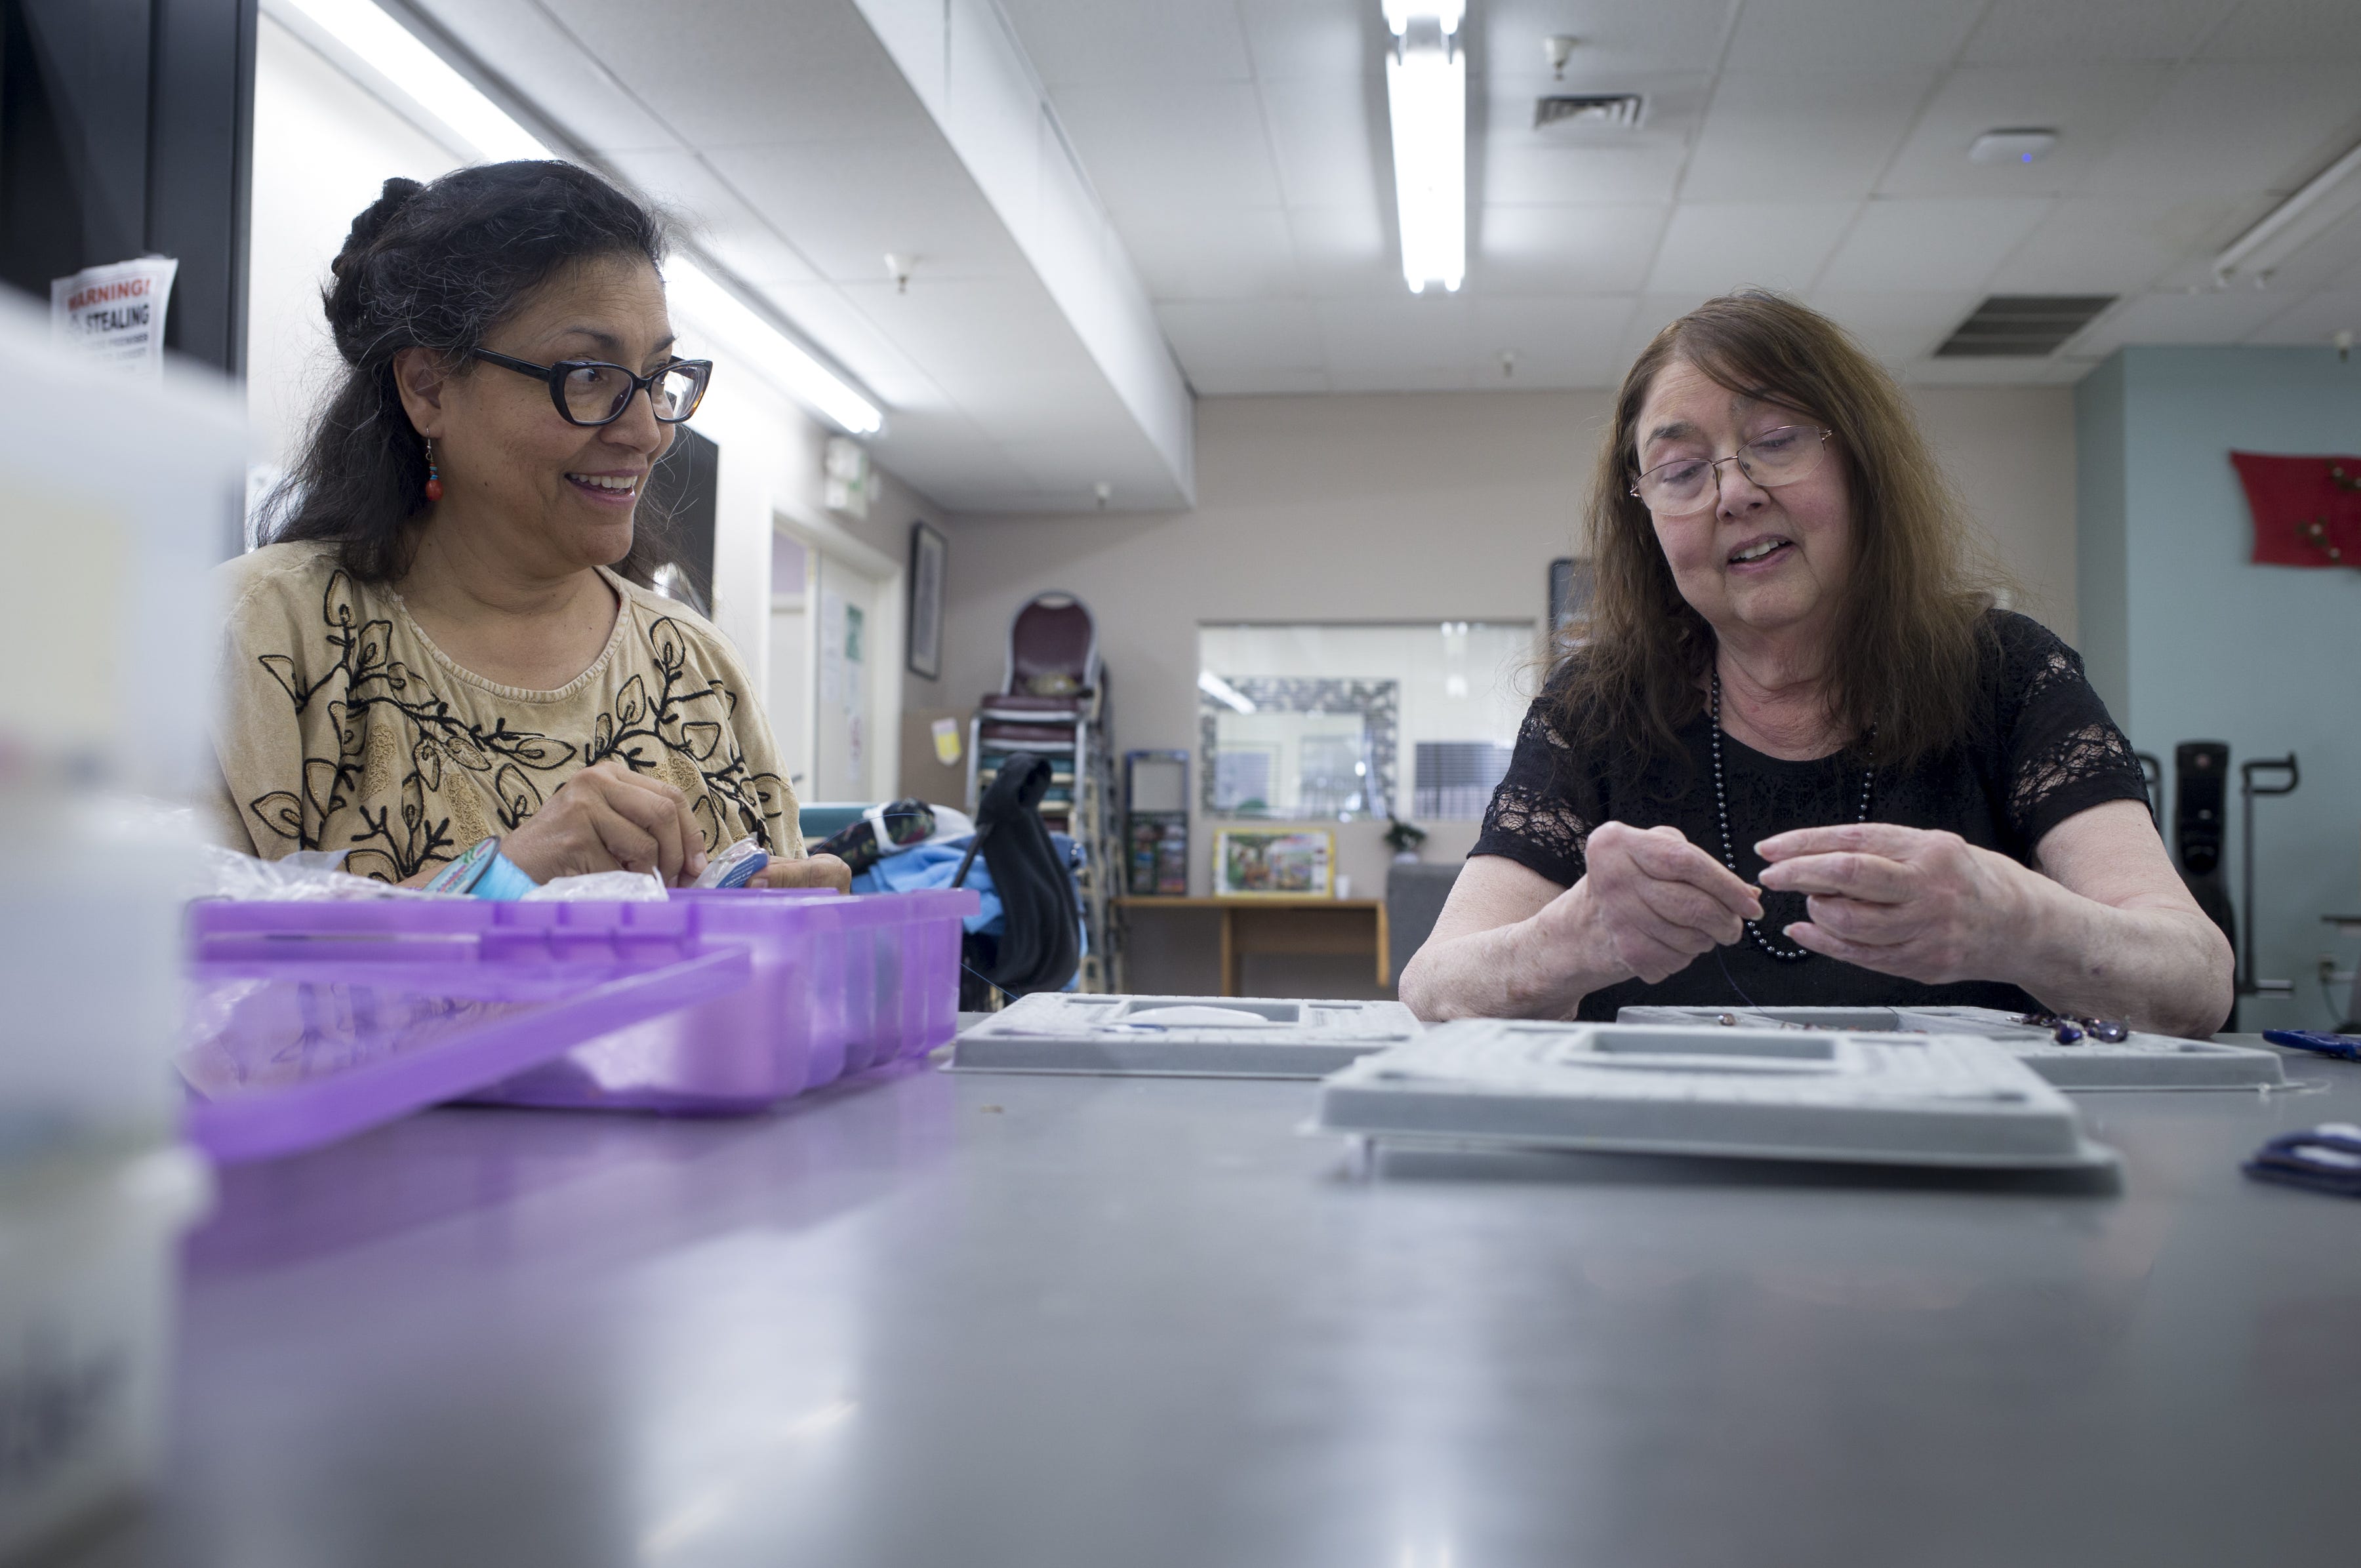 Barbara Cory (right) and Cynthia Fodness make jewelry, Dec. 12, 2018 at Phoenix Senior Opportunities, 1220 S. Seventh Ave. in Phoenix. Cory copes with asthma that can flare up when smog worsens in Phoenix’s winter months.